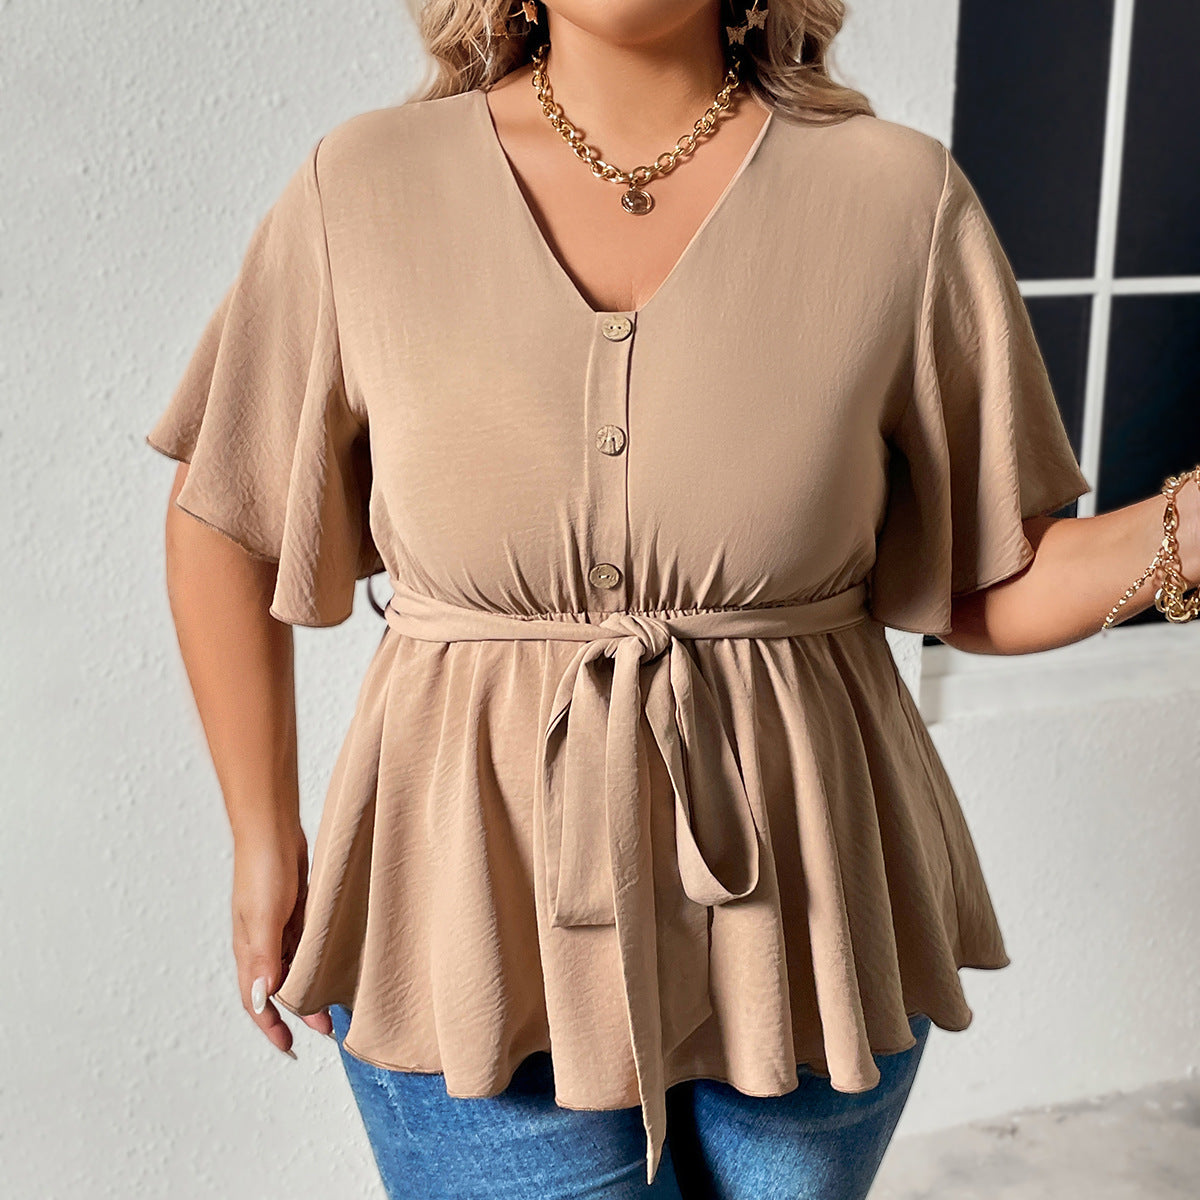 Plus Size Popular Summer V neck Slimming Casual Women Top